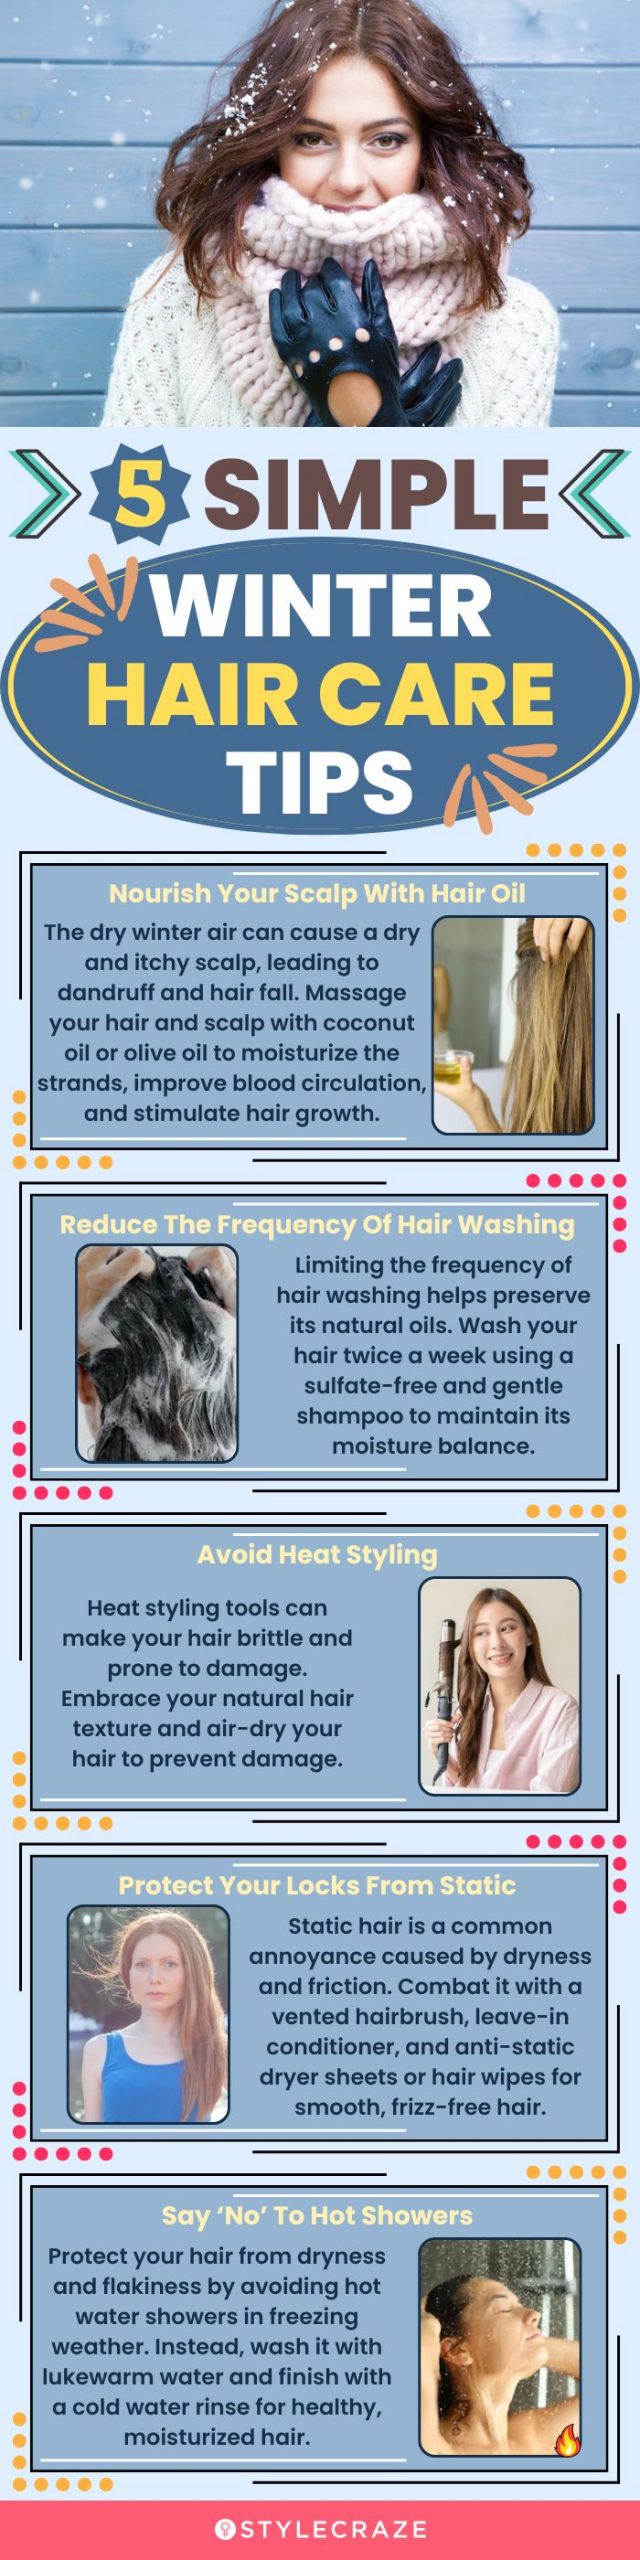 5 simple winter hair care tips (infographic)